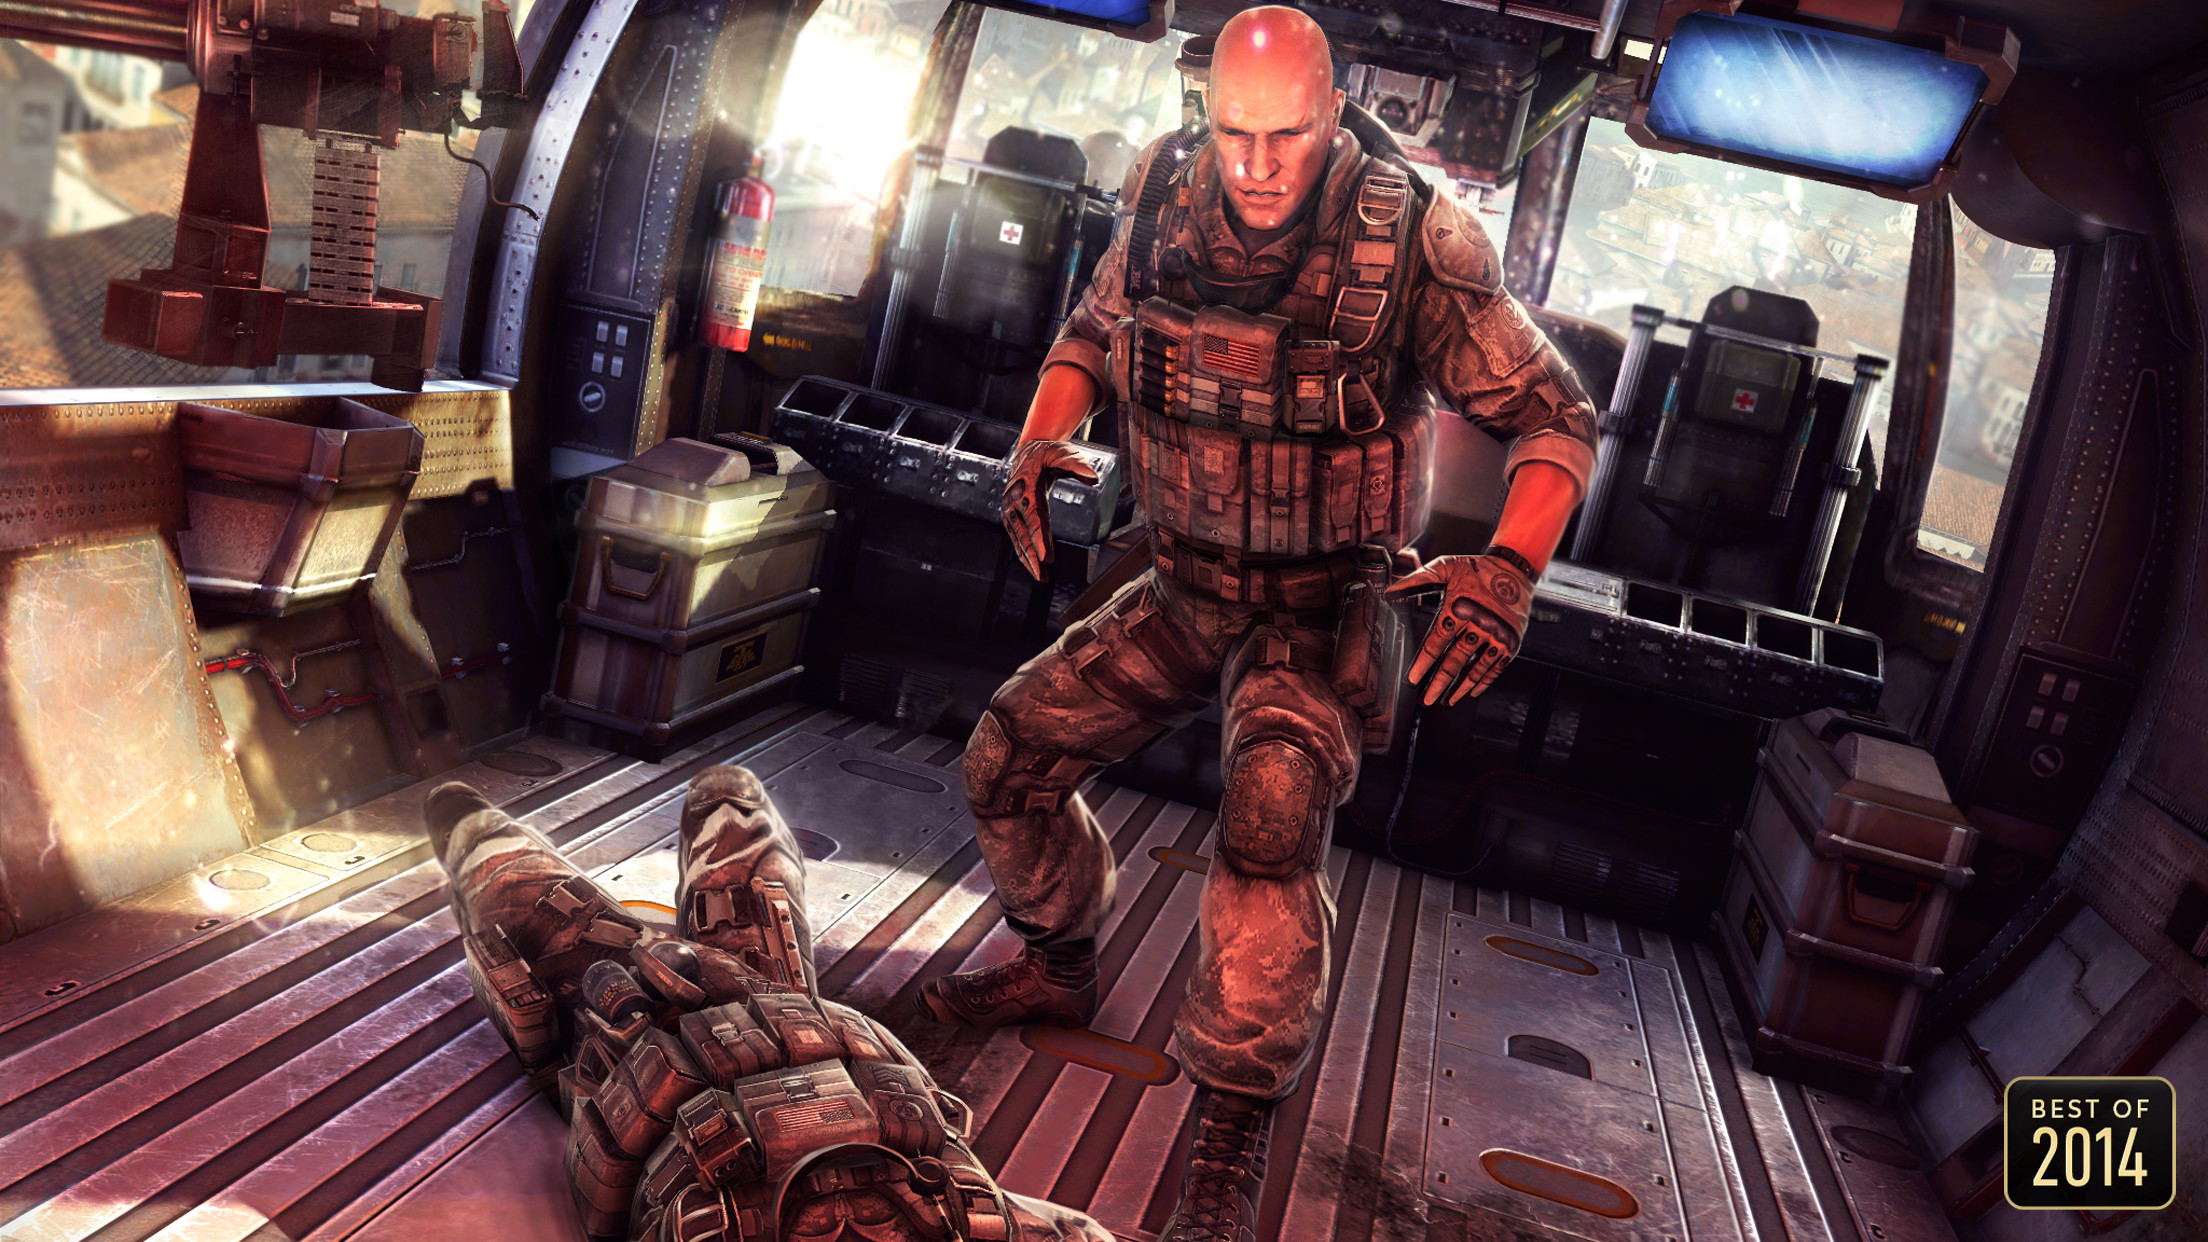 2208x1242 Gameloft's Modern Combat 5: Blackout update brings new content, moves game  to Freemium model | TalkAndroid.com